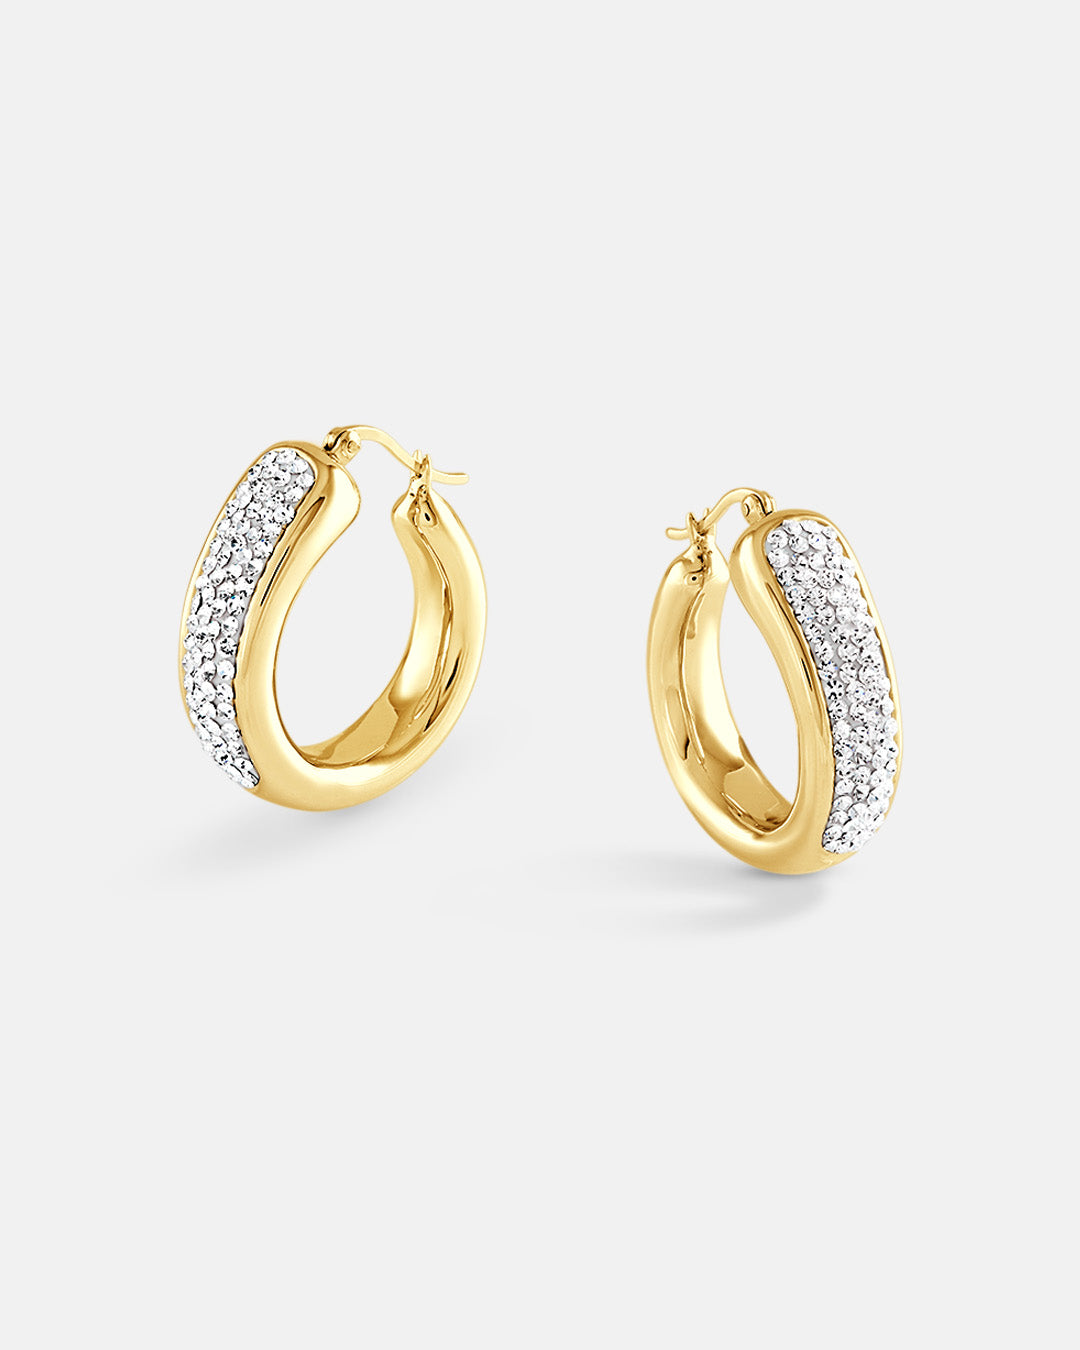 This is the product picture of a chunky statement elegant hoop earrings with micro pavé crystals plated in gold in sterling silver material